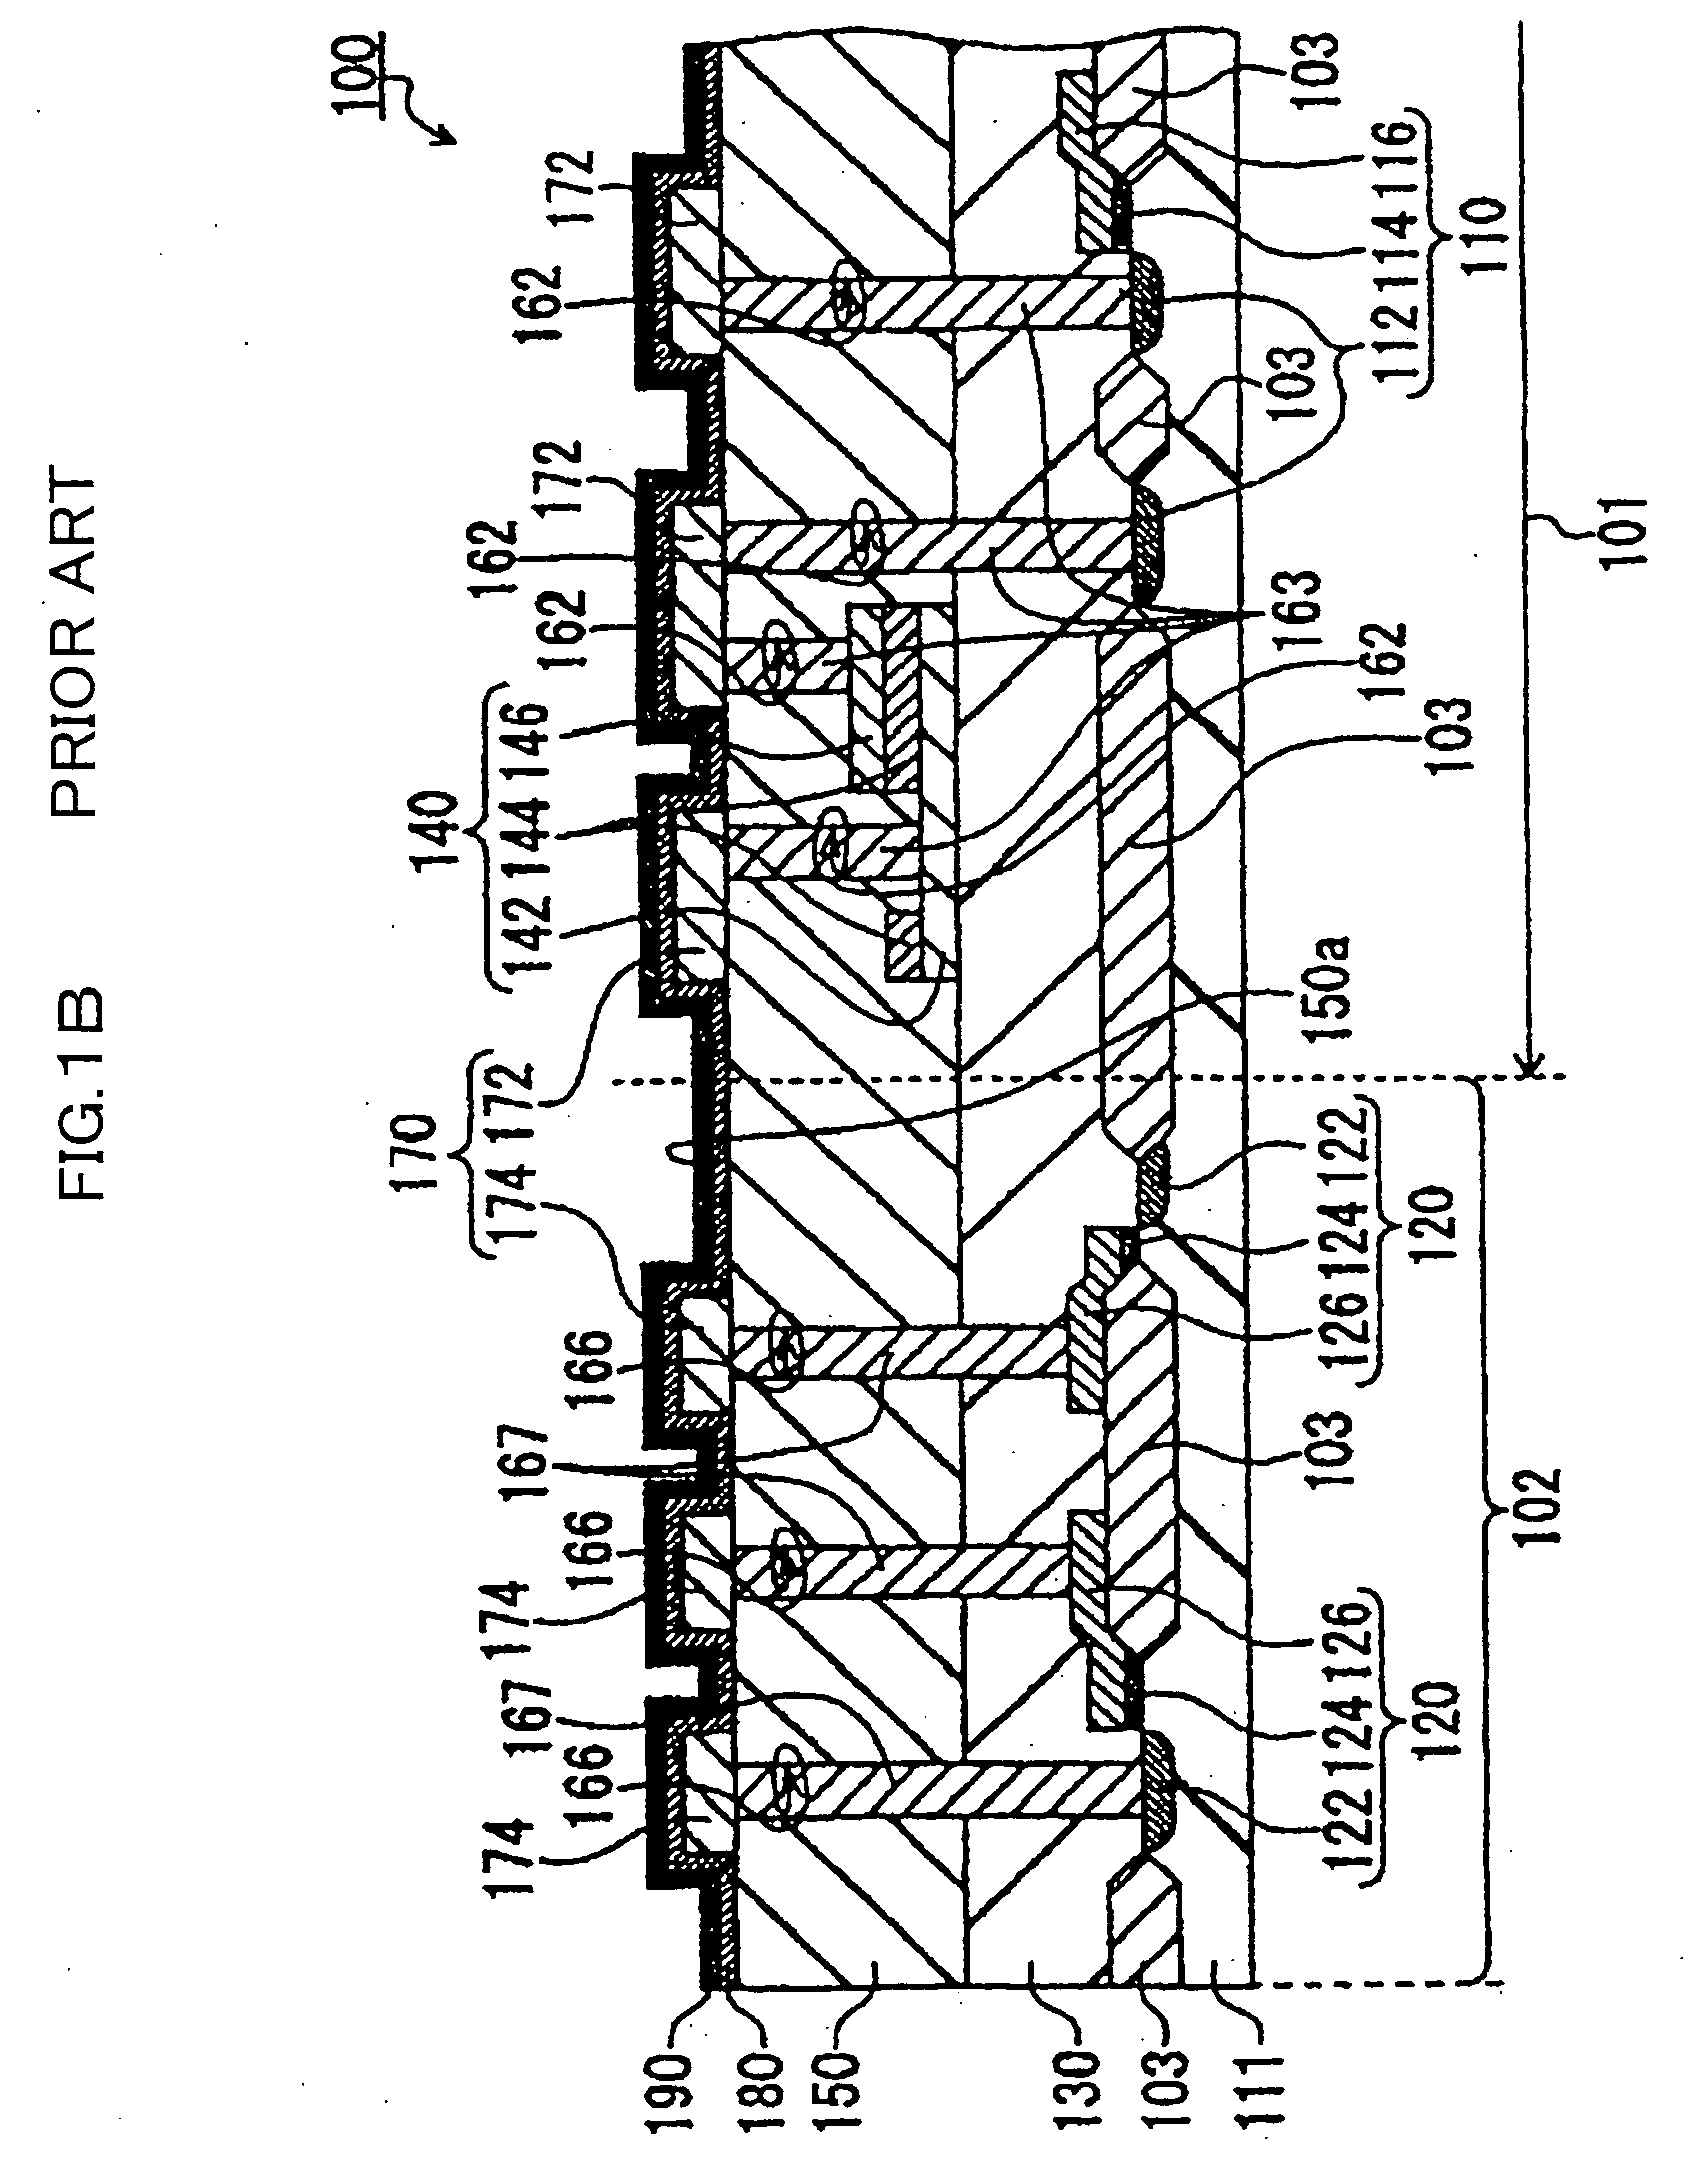 Hybrid memory device and method for manufacturing the same